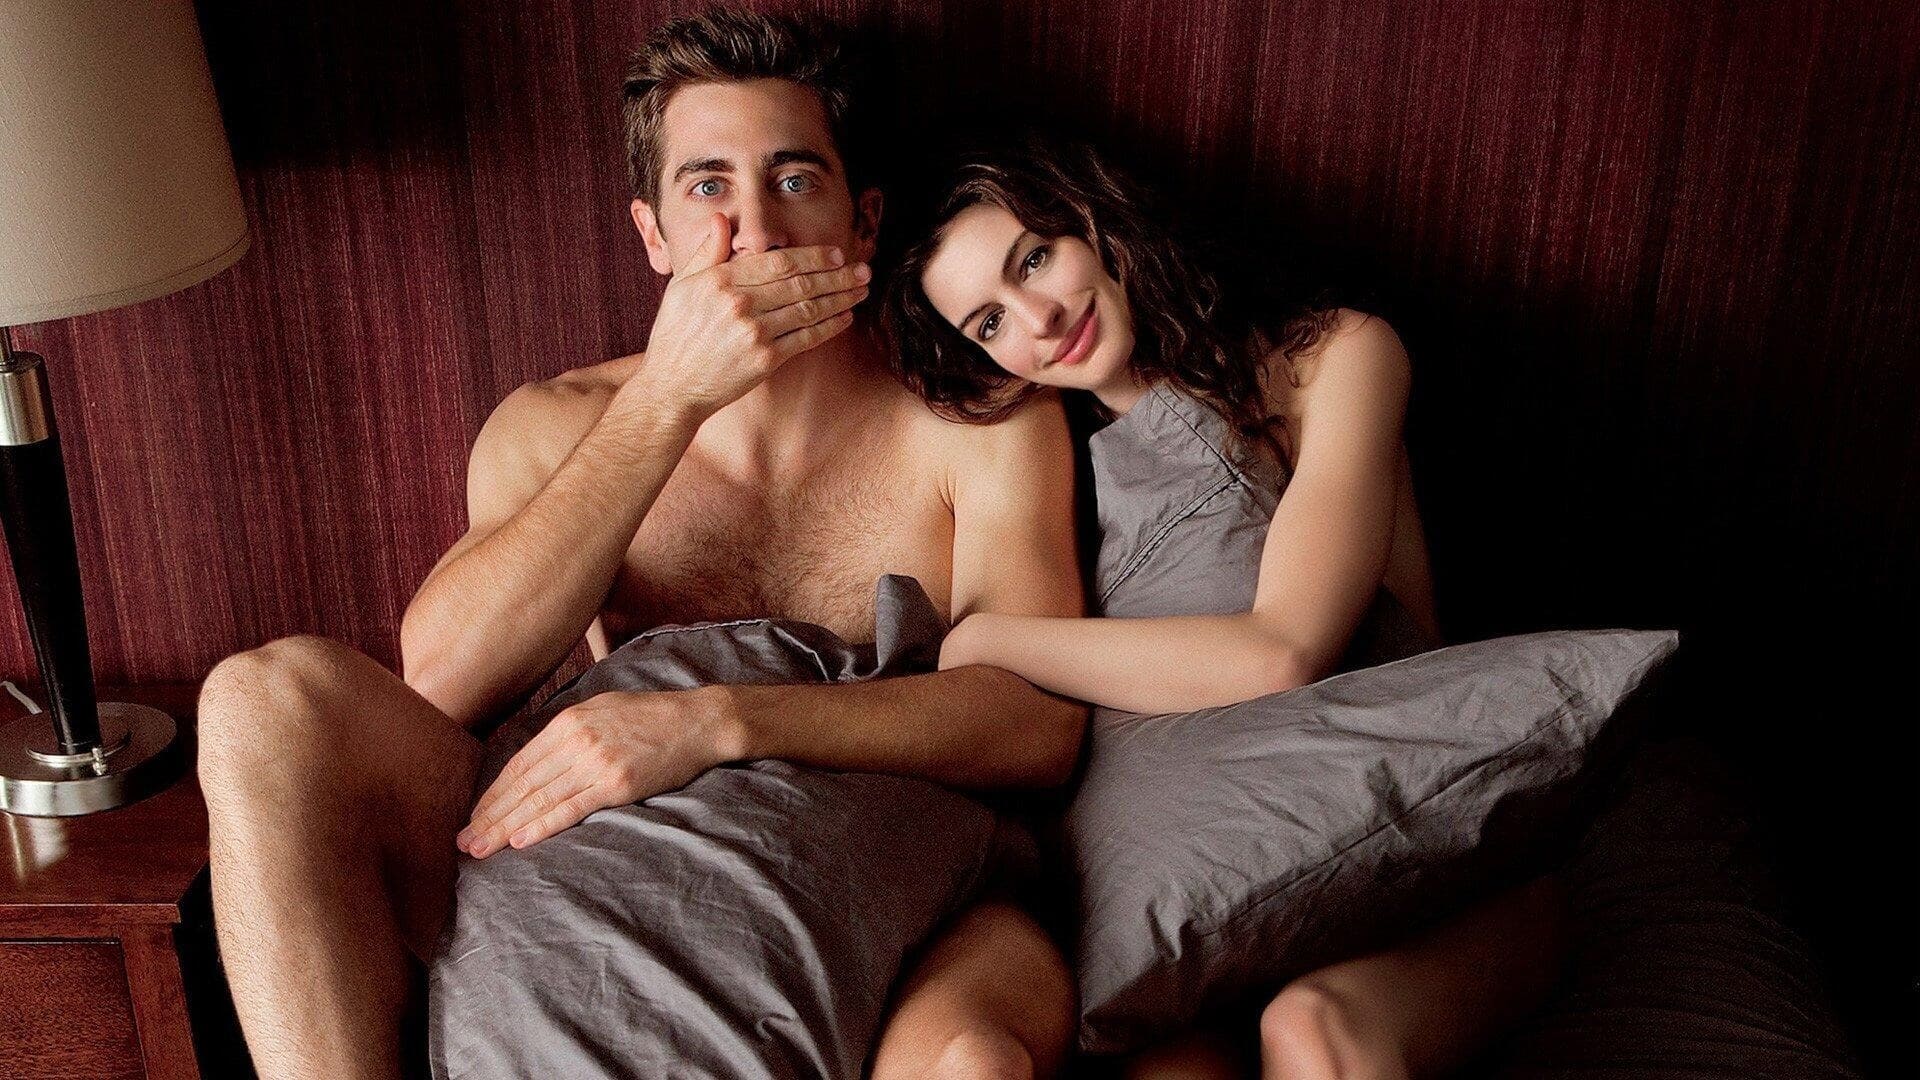 Love & Other Drugs 2010 Soap2Day